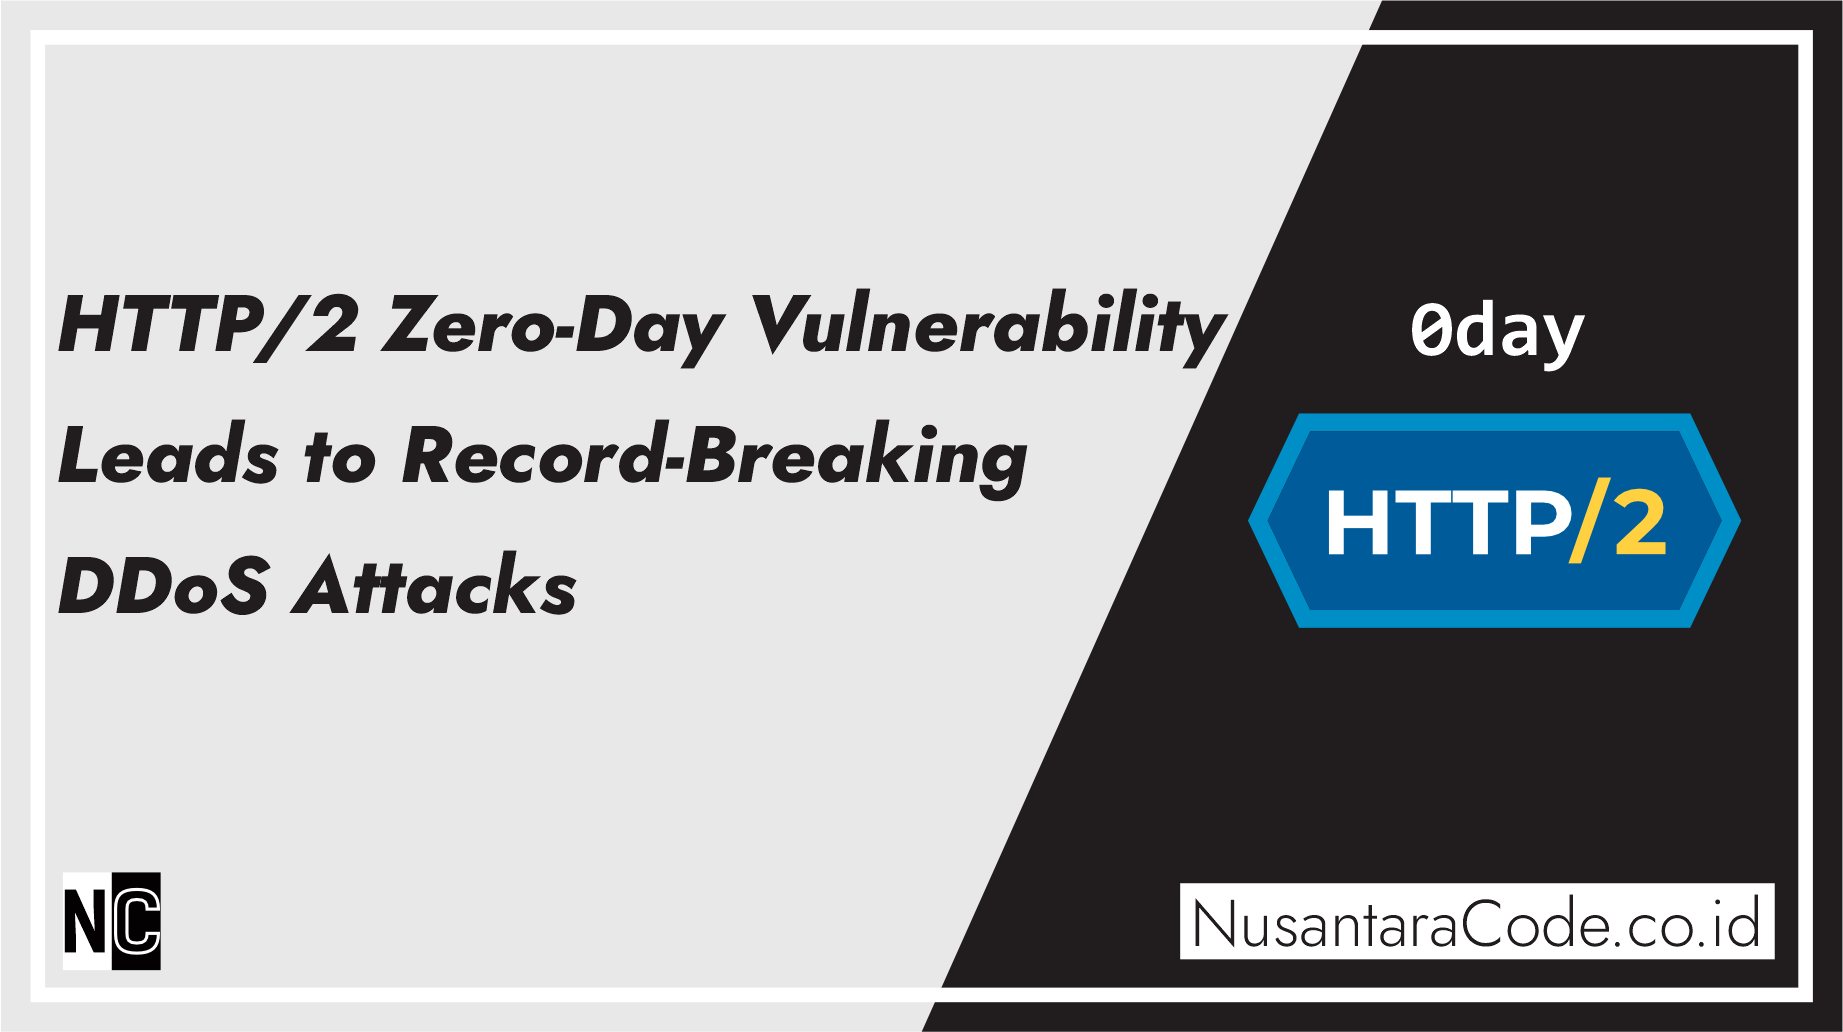 HTTP/2 Zero-Day Vulnerability Leads to Record-Breaking DDoS Attacks